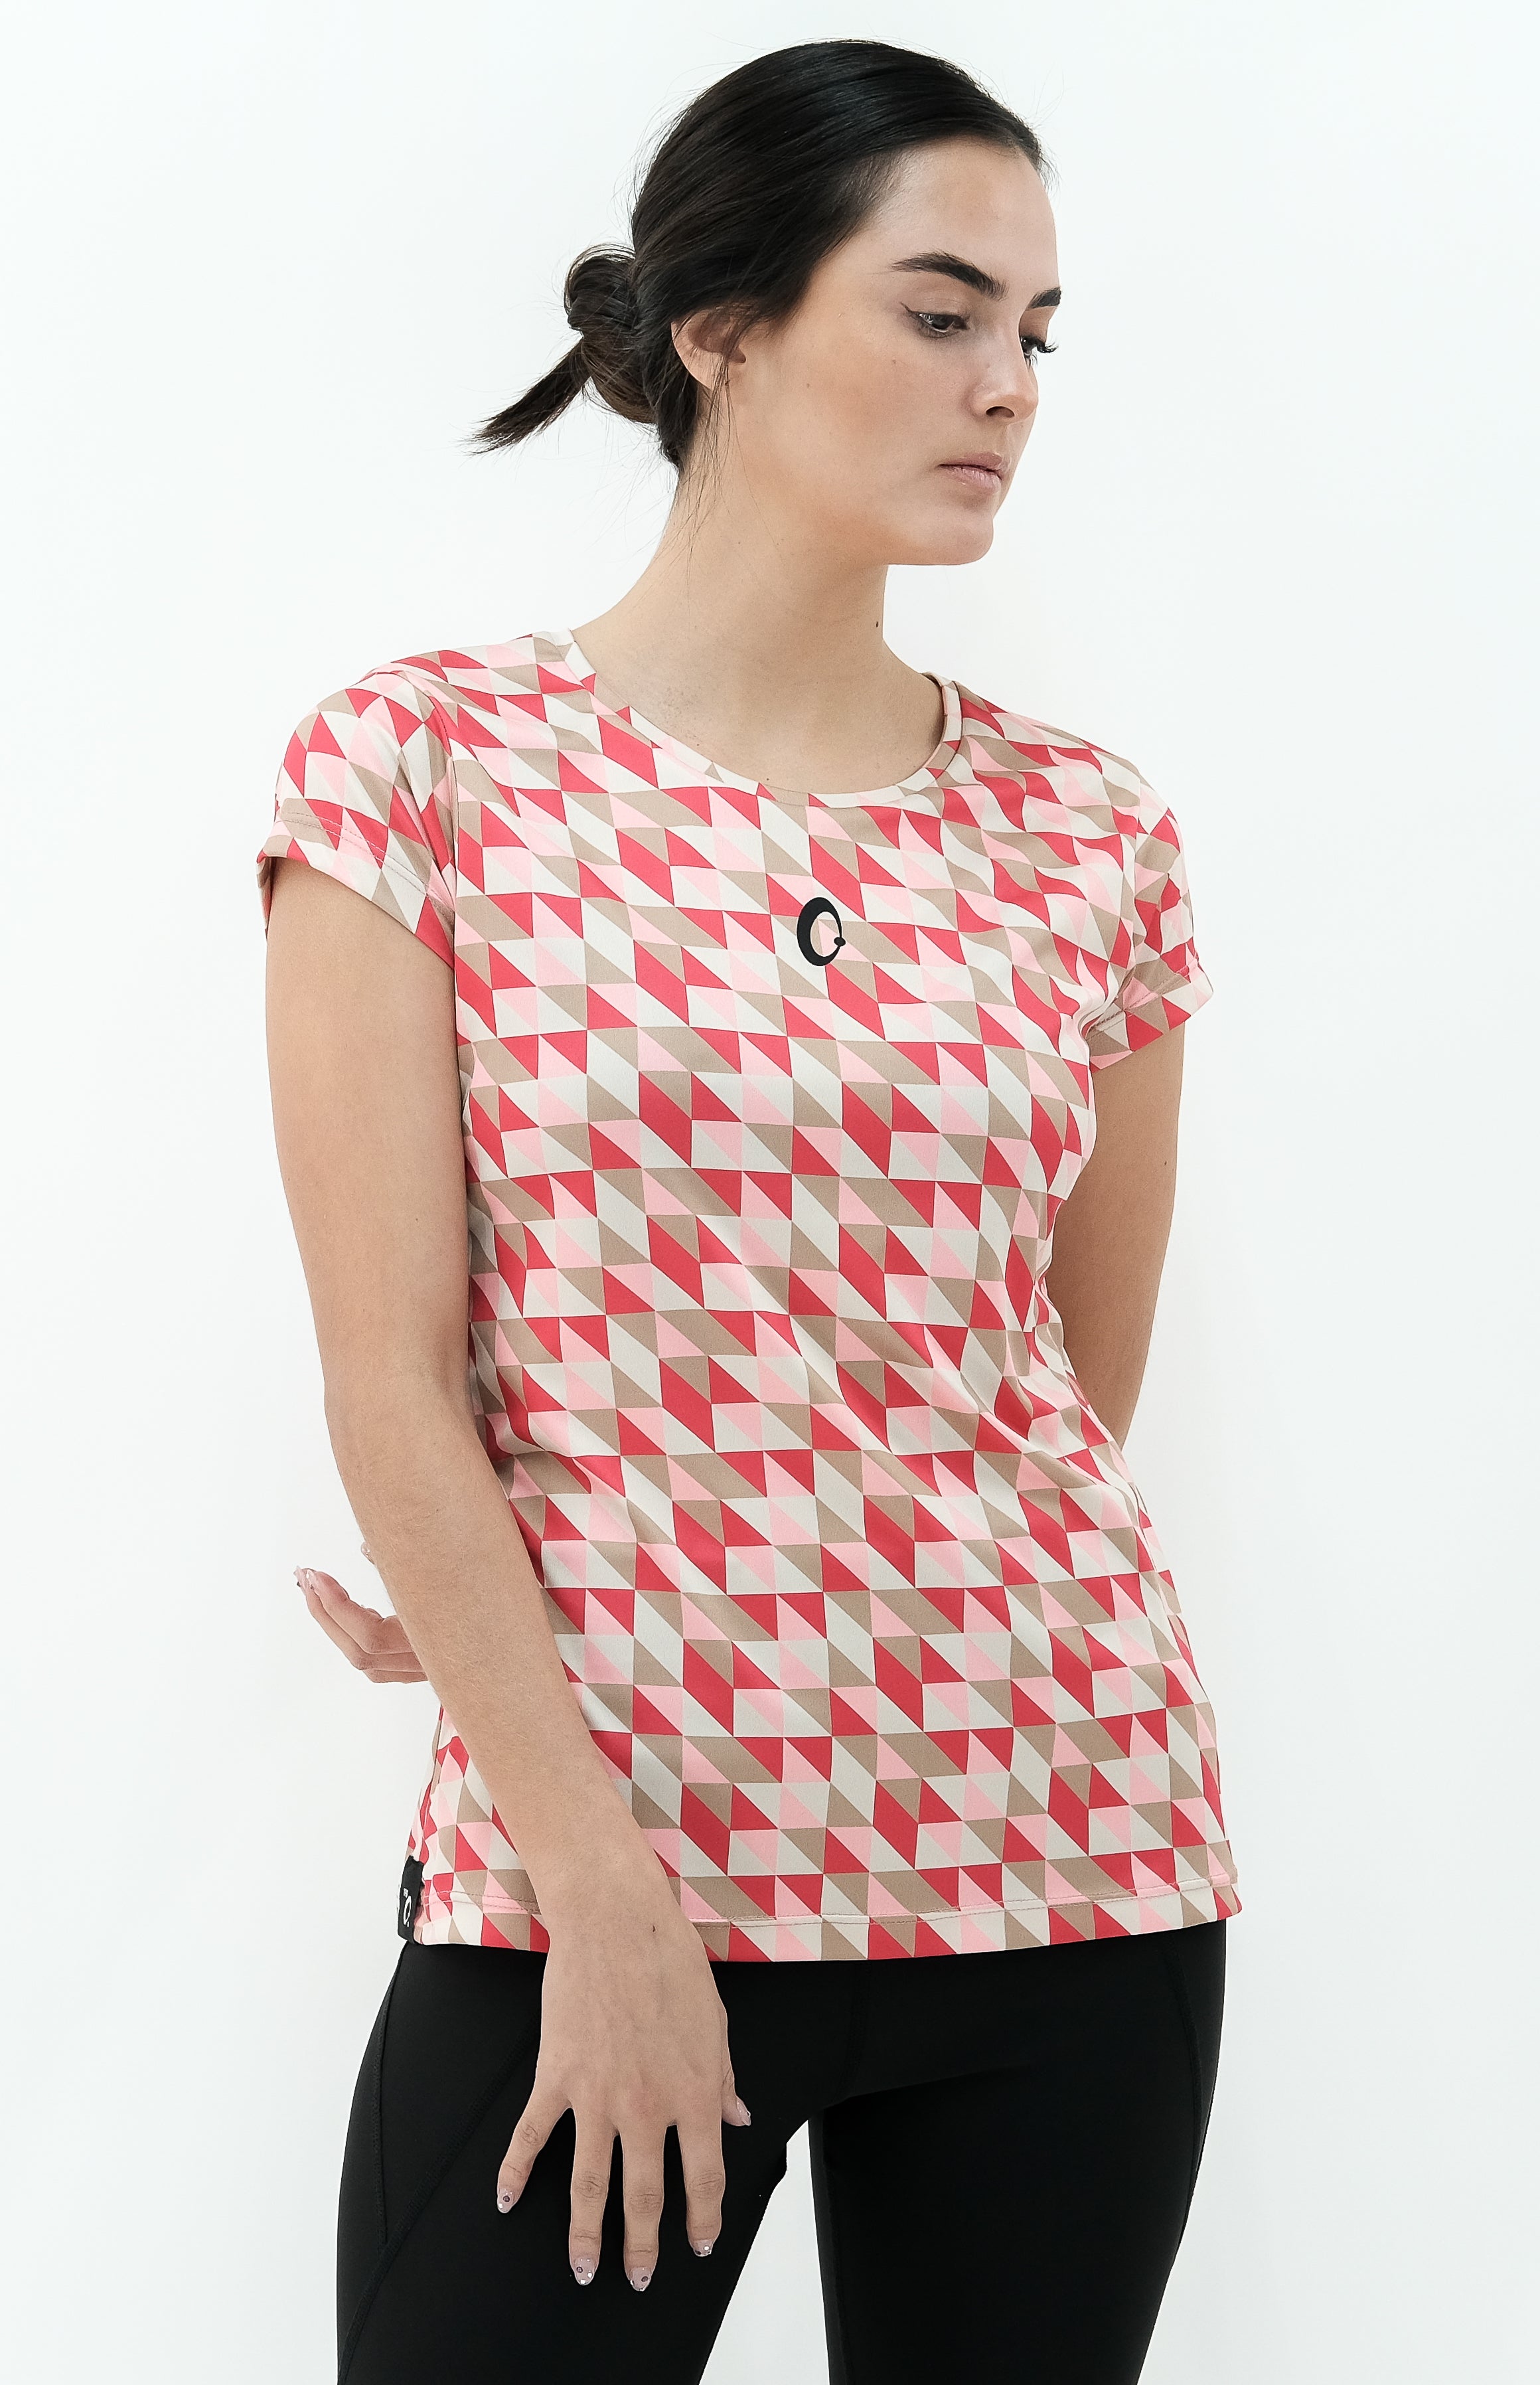 Women's Short Sleeve Recycled Triangles T-shirt